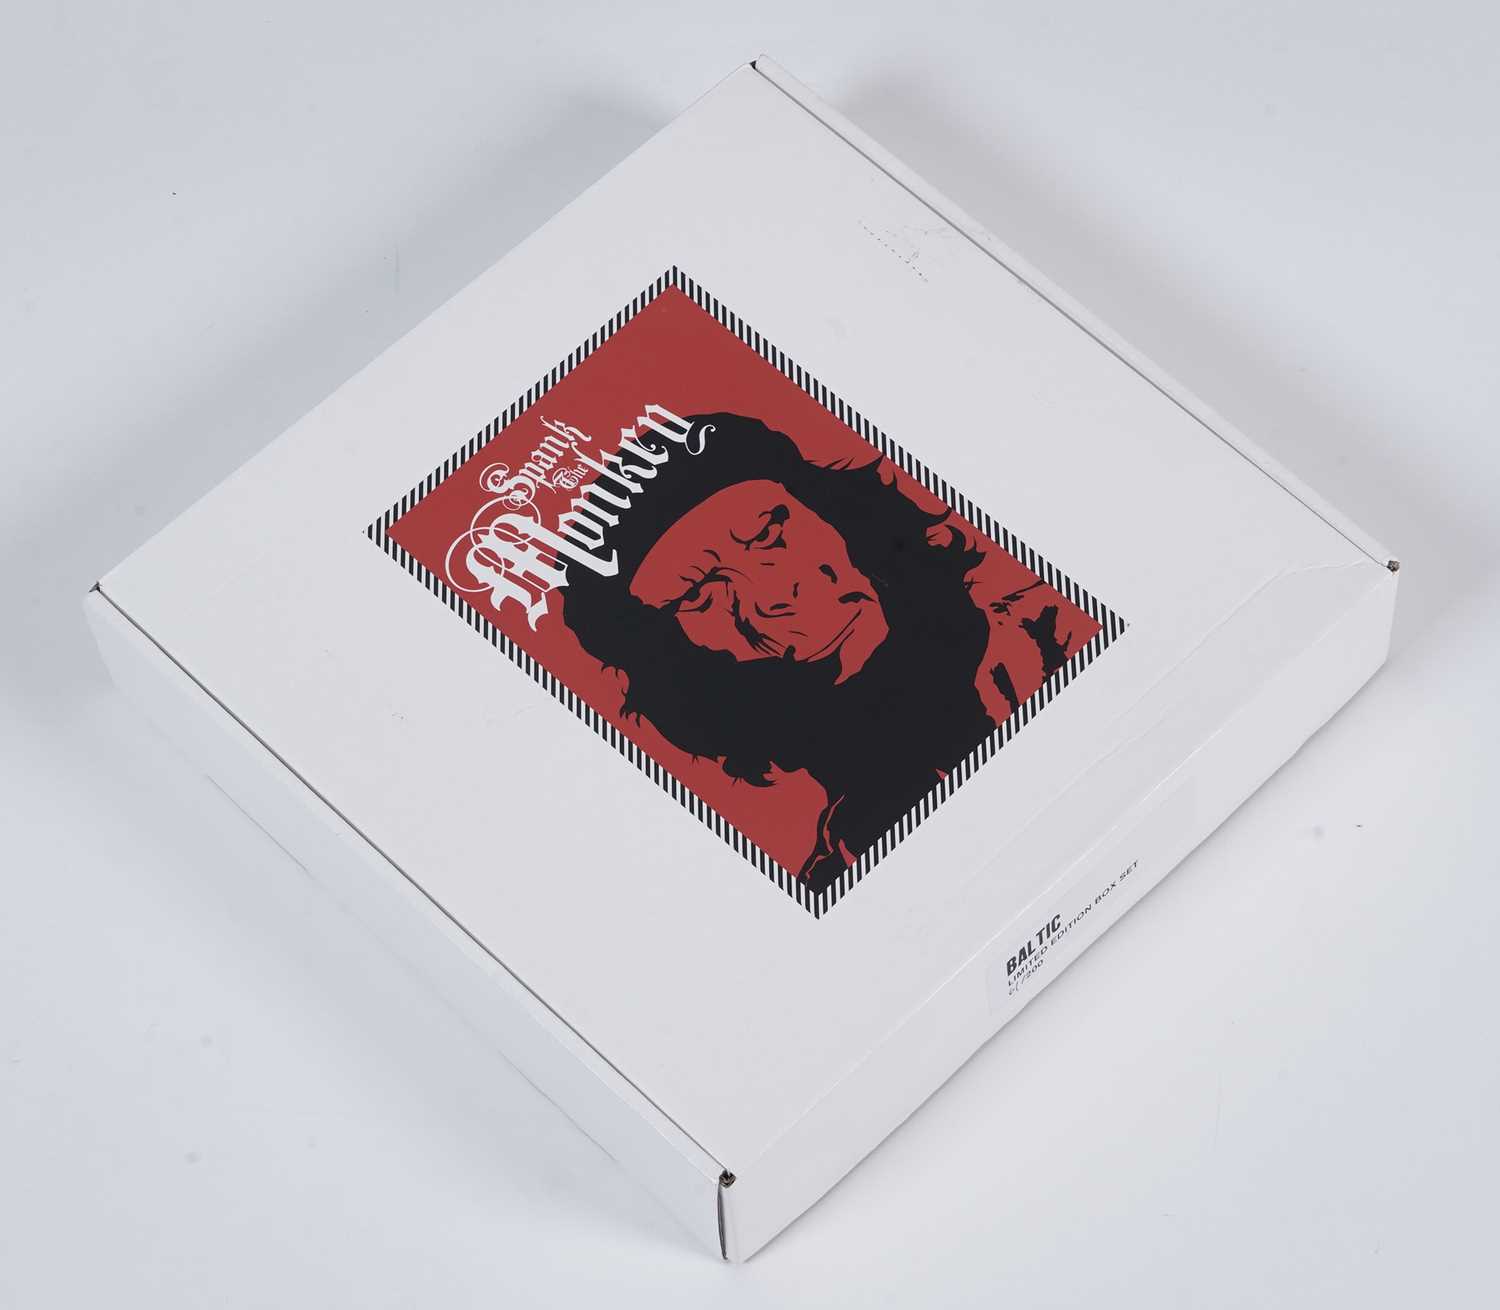 Contemporary collaborative - "Spank the Monkey" | BALTIC limited edition exhibition box set - Image 2 of 16